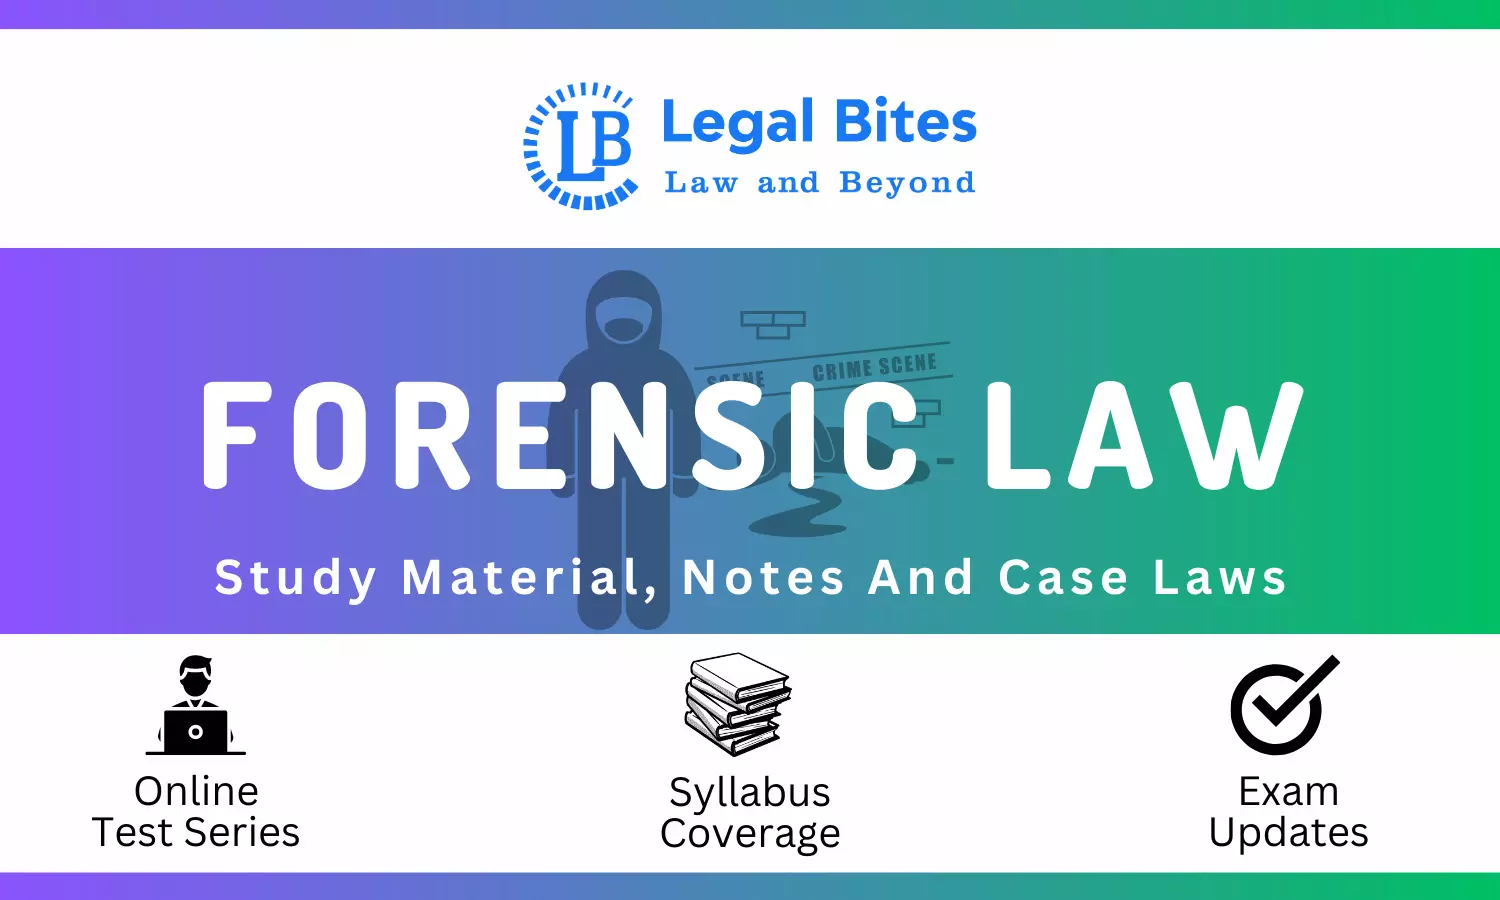 Forensic Law - Notes, Case Laws And Study Material